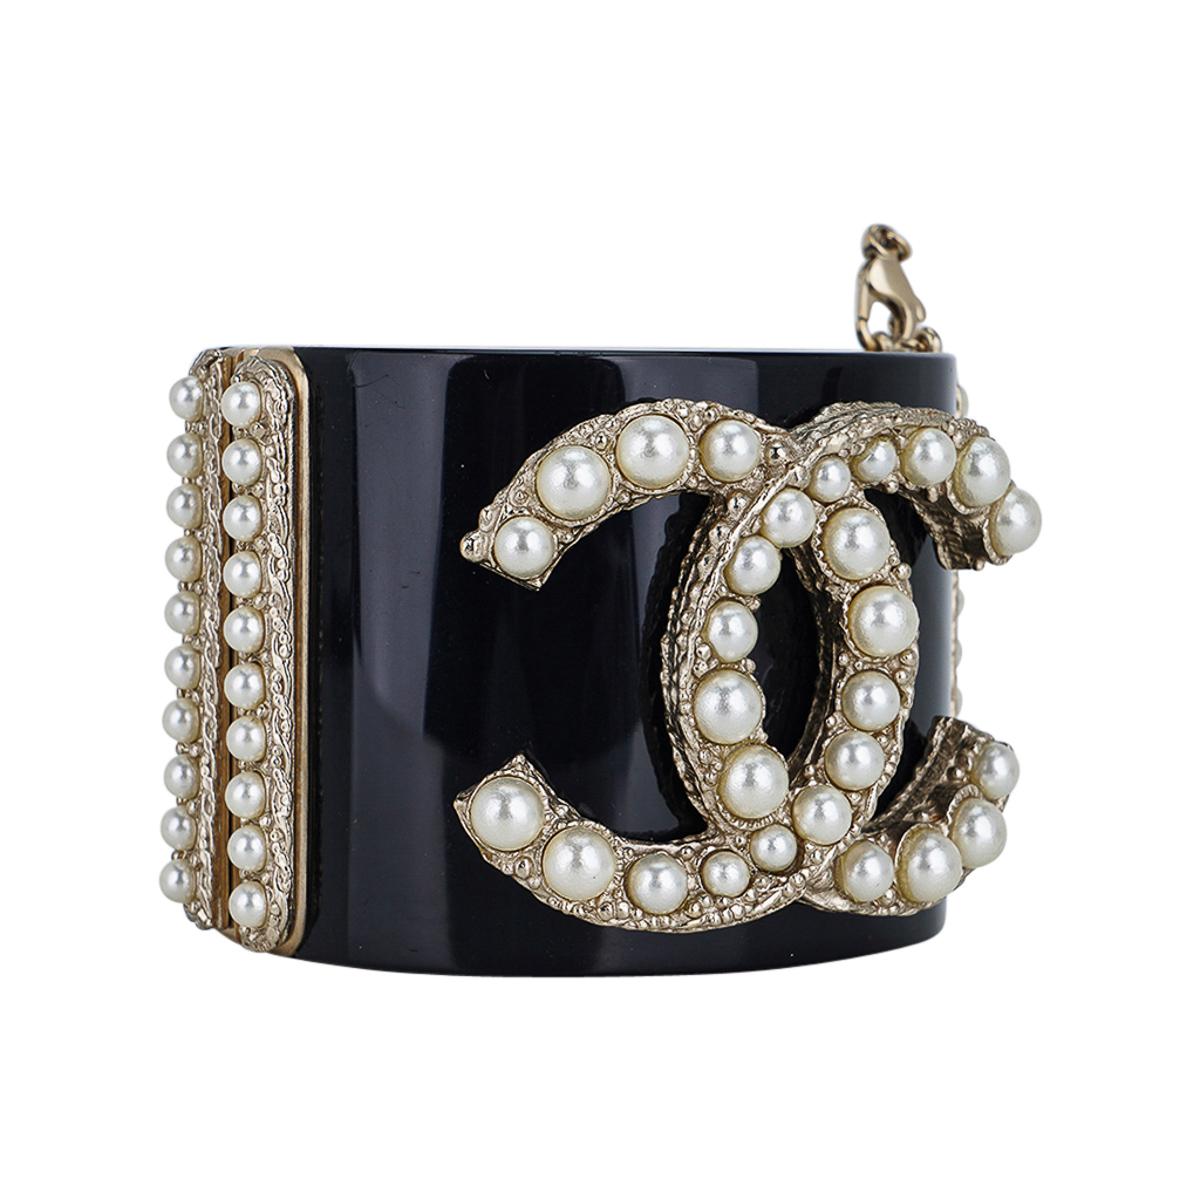 Mightychic offers a c 2011 Chanel Black Resin/Pearl Encrusted Clamper Cuff bracelet.
Bold pearl encrusted CC with pearls along the both sides of the cuff.
Spring hinge closure.
This fabulous bold statement cuff is timeless and perfect to dress up or